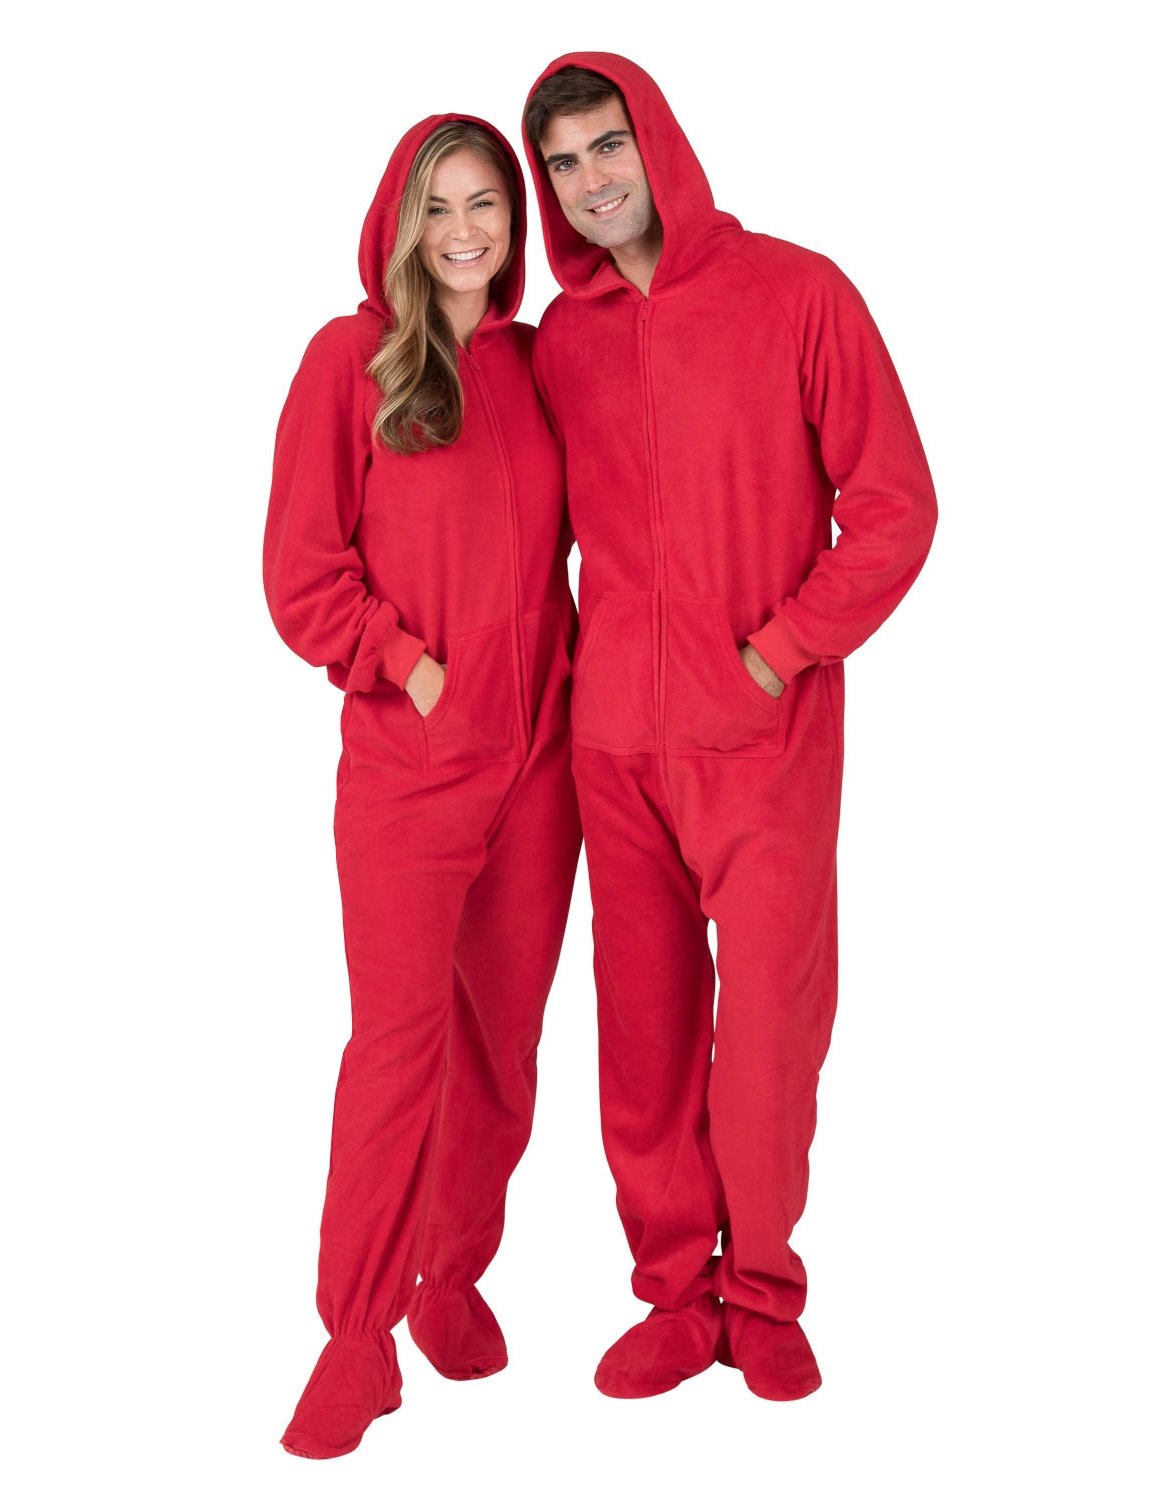 Footed Pajamas - Family Matching Chilli Red Hoodie One Pieces for Boys, Girls, Men, Women and Pets - Adult - Medium Plus/Wide (Fits 5'8 - 5'11") - image 3 of 7